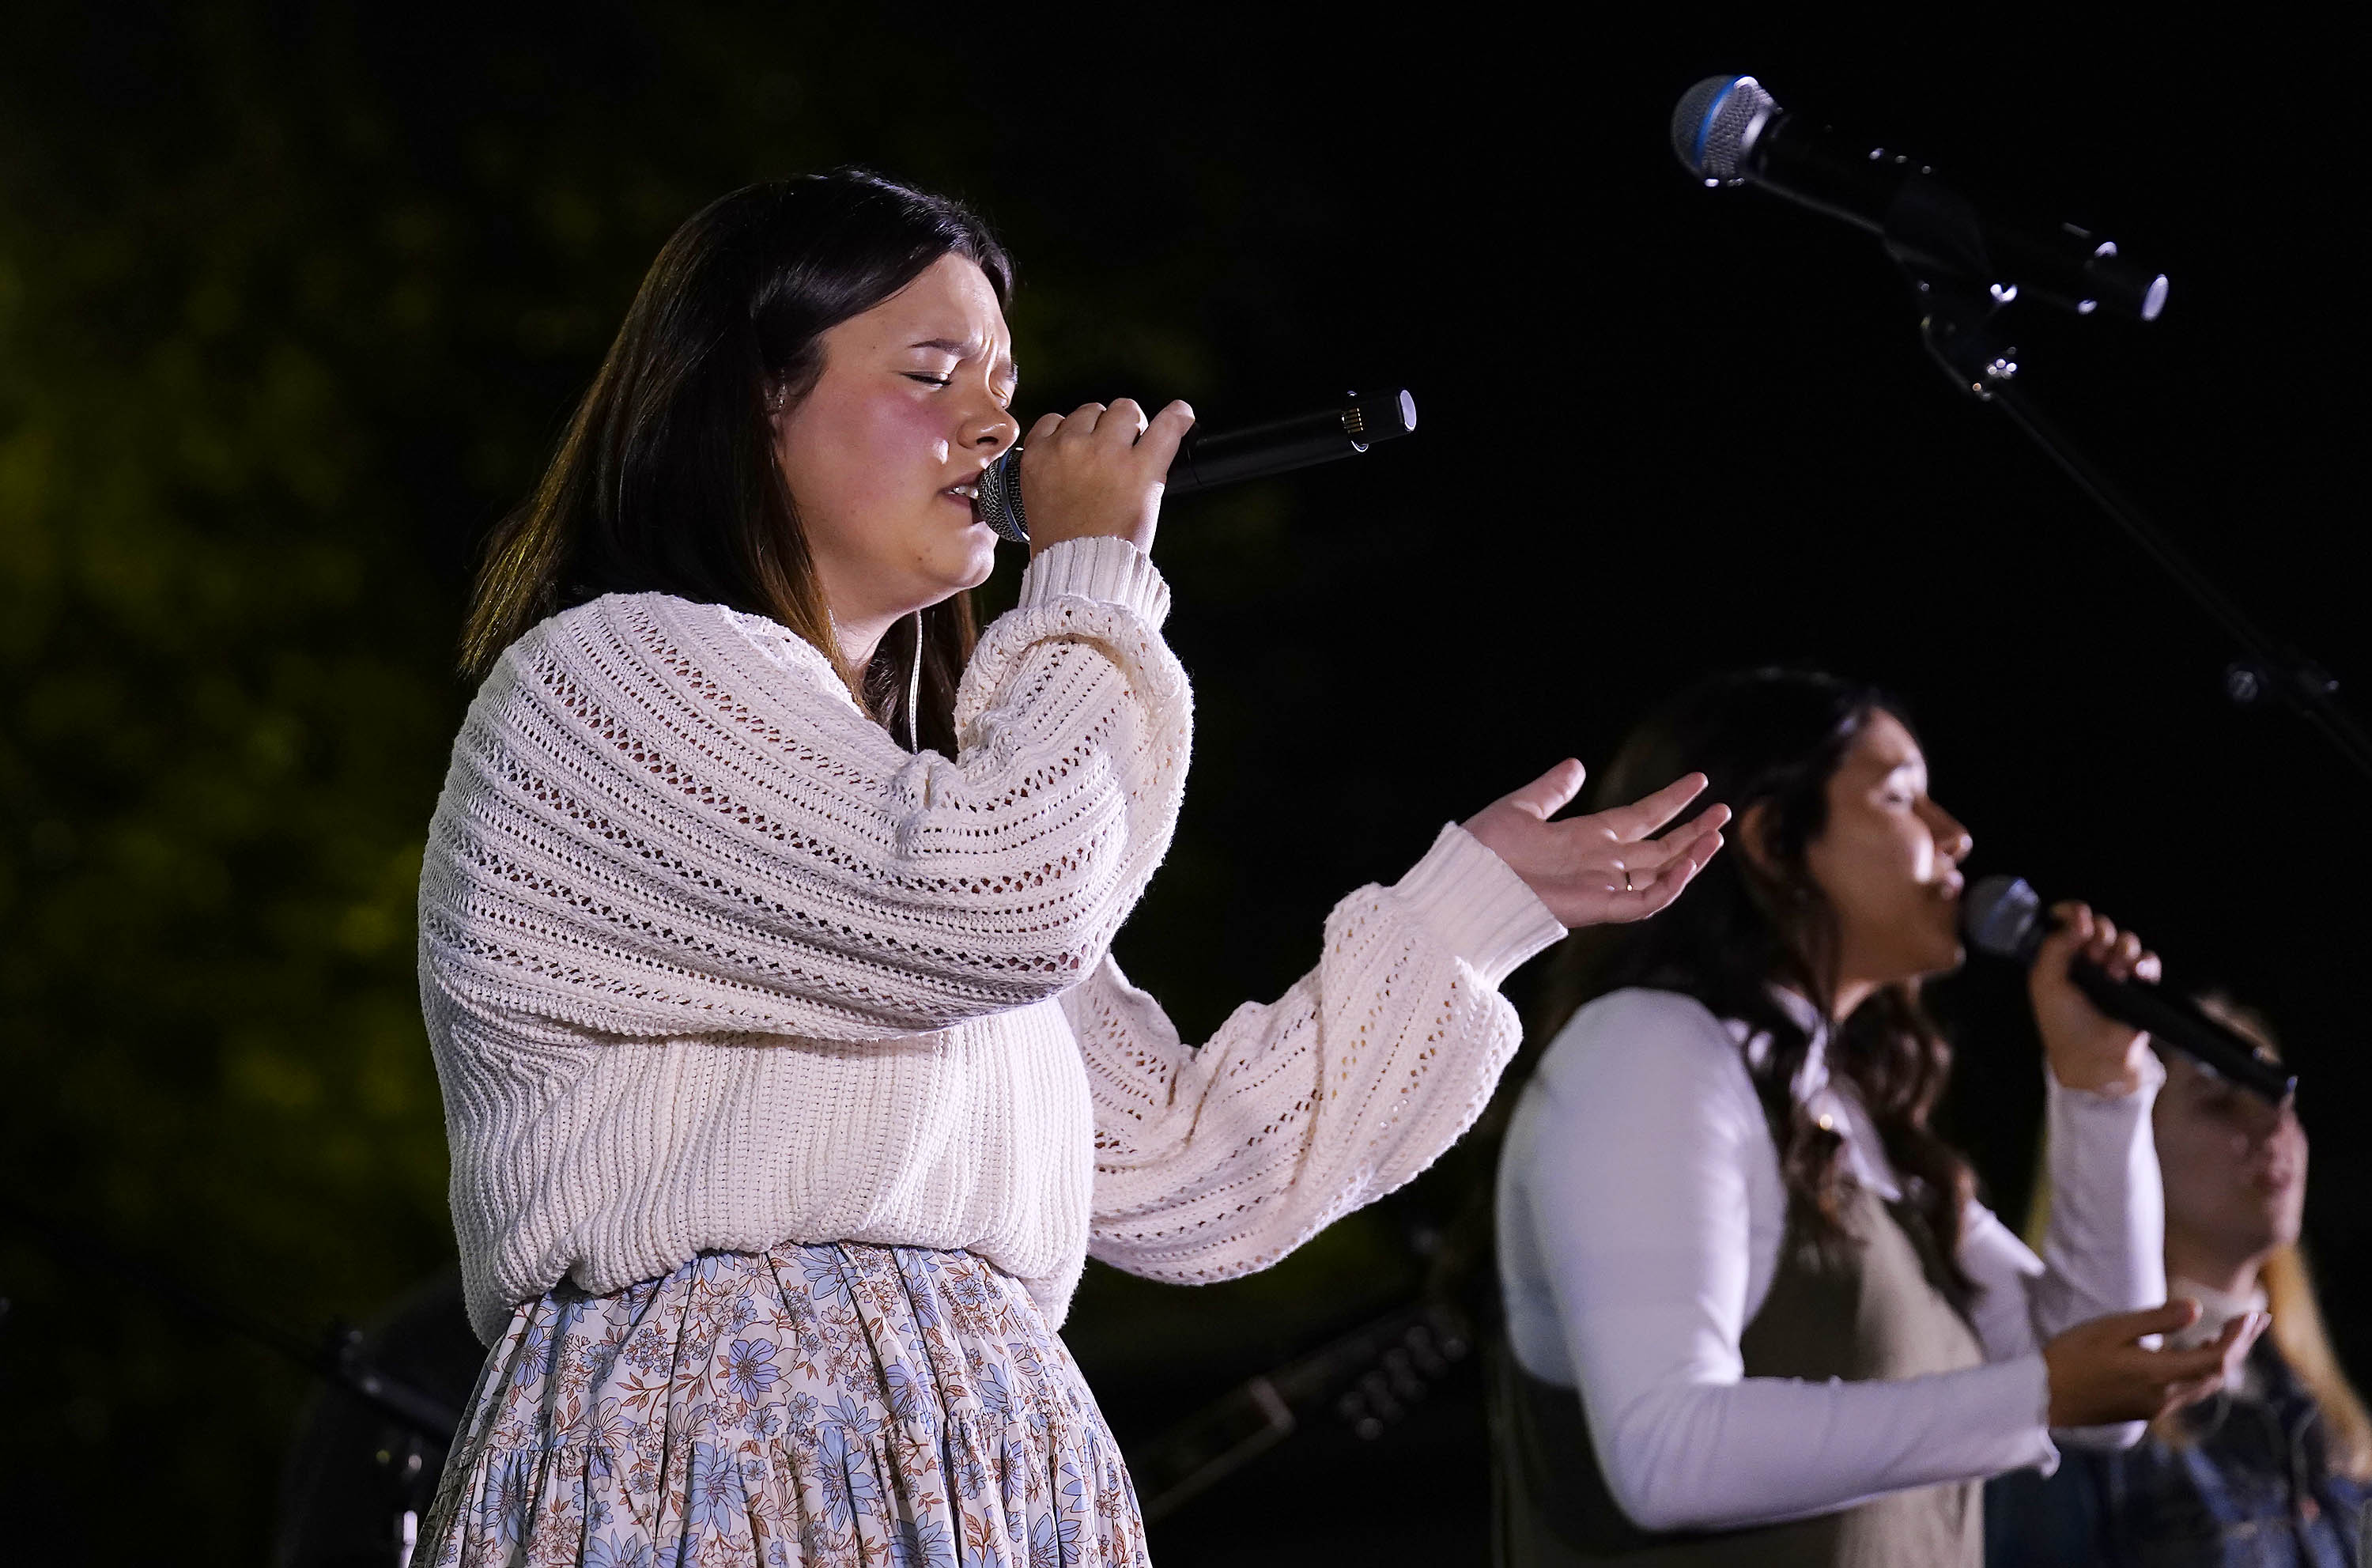 A Night of Worship Music and Dance in the Garden - GCU News